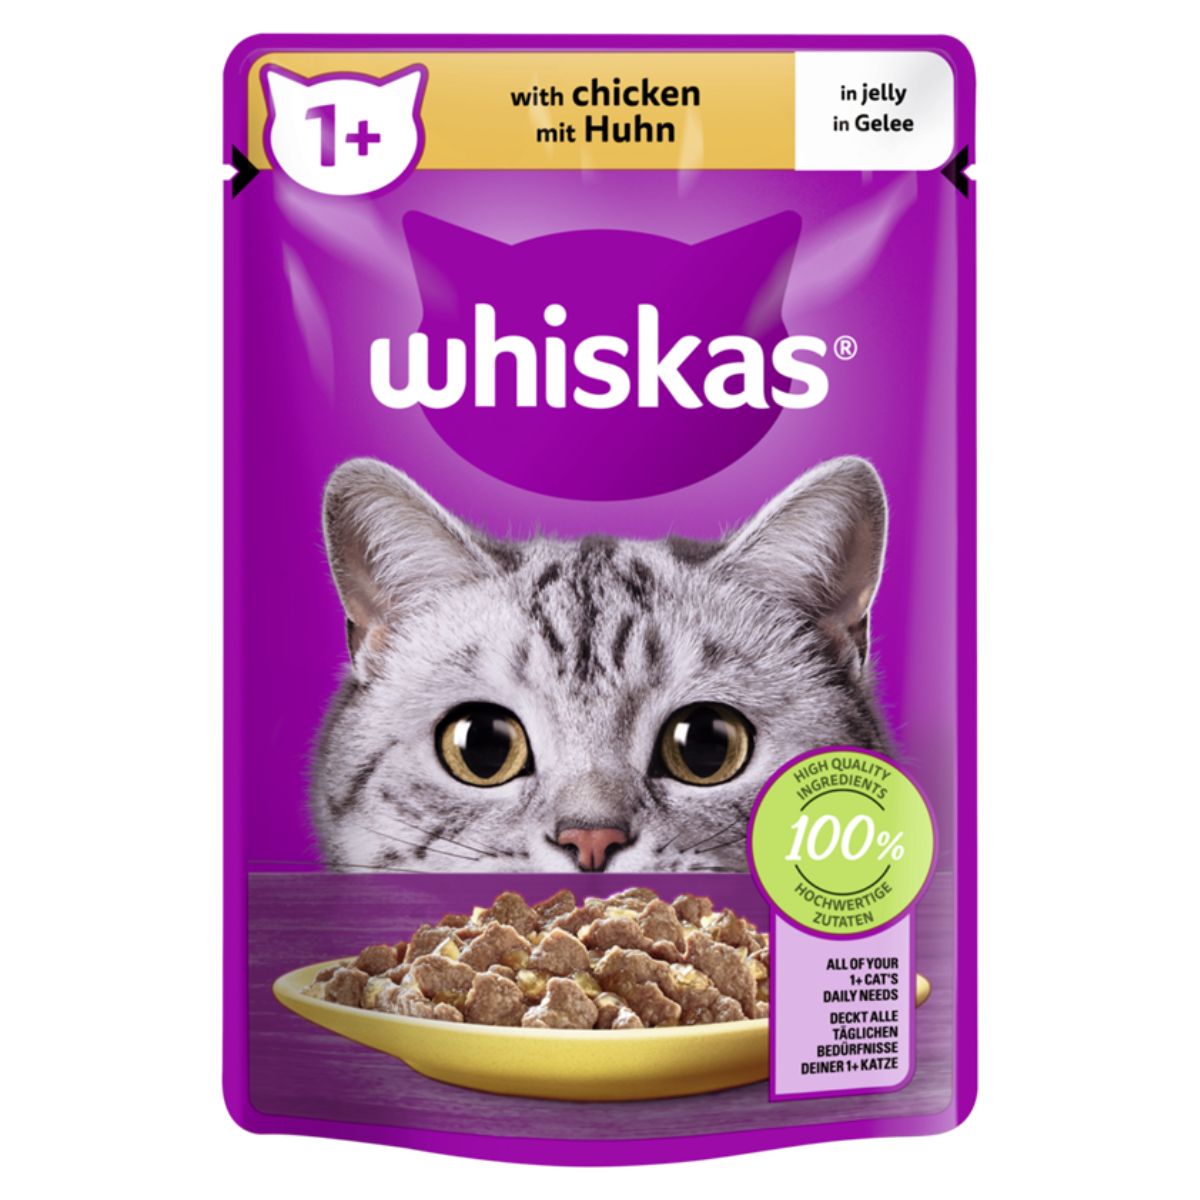 Whiskas - 1+ Adult Wet Cat Food Pouches in Jelly with Chicken - 85g cat food pouch with chicken and rice.